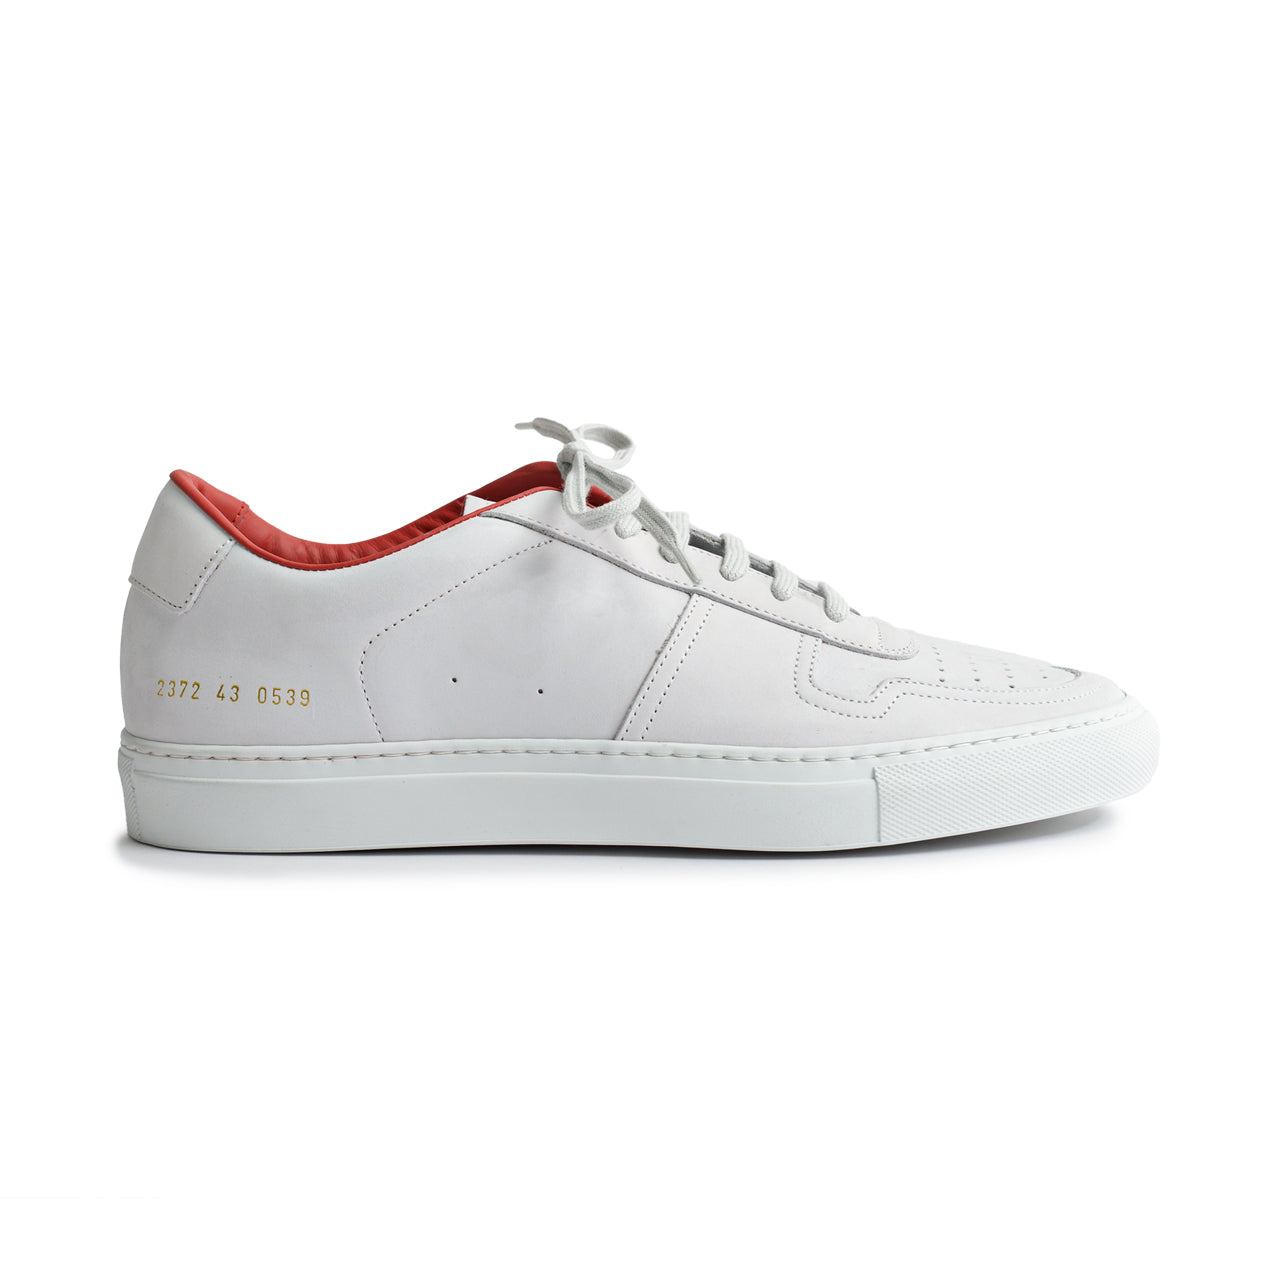 Common Projects Bball Summer Nubuck Sneakers | Uncrate